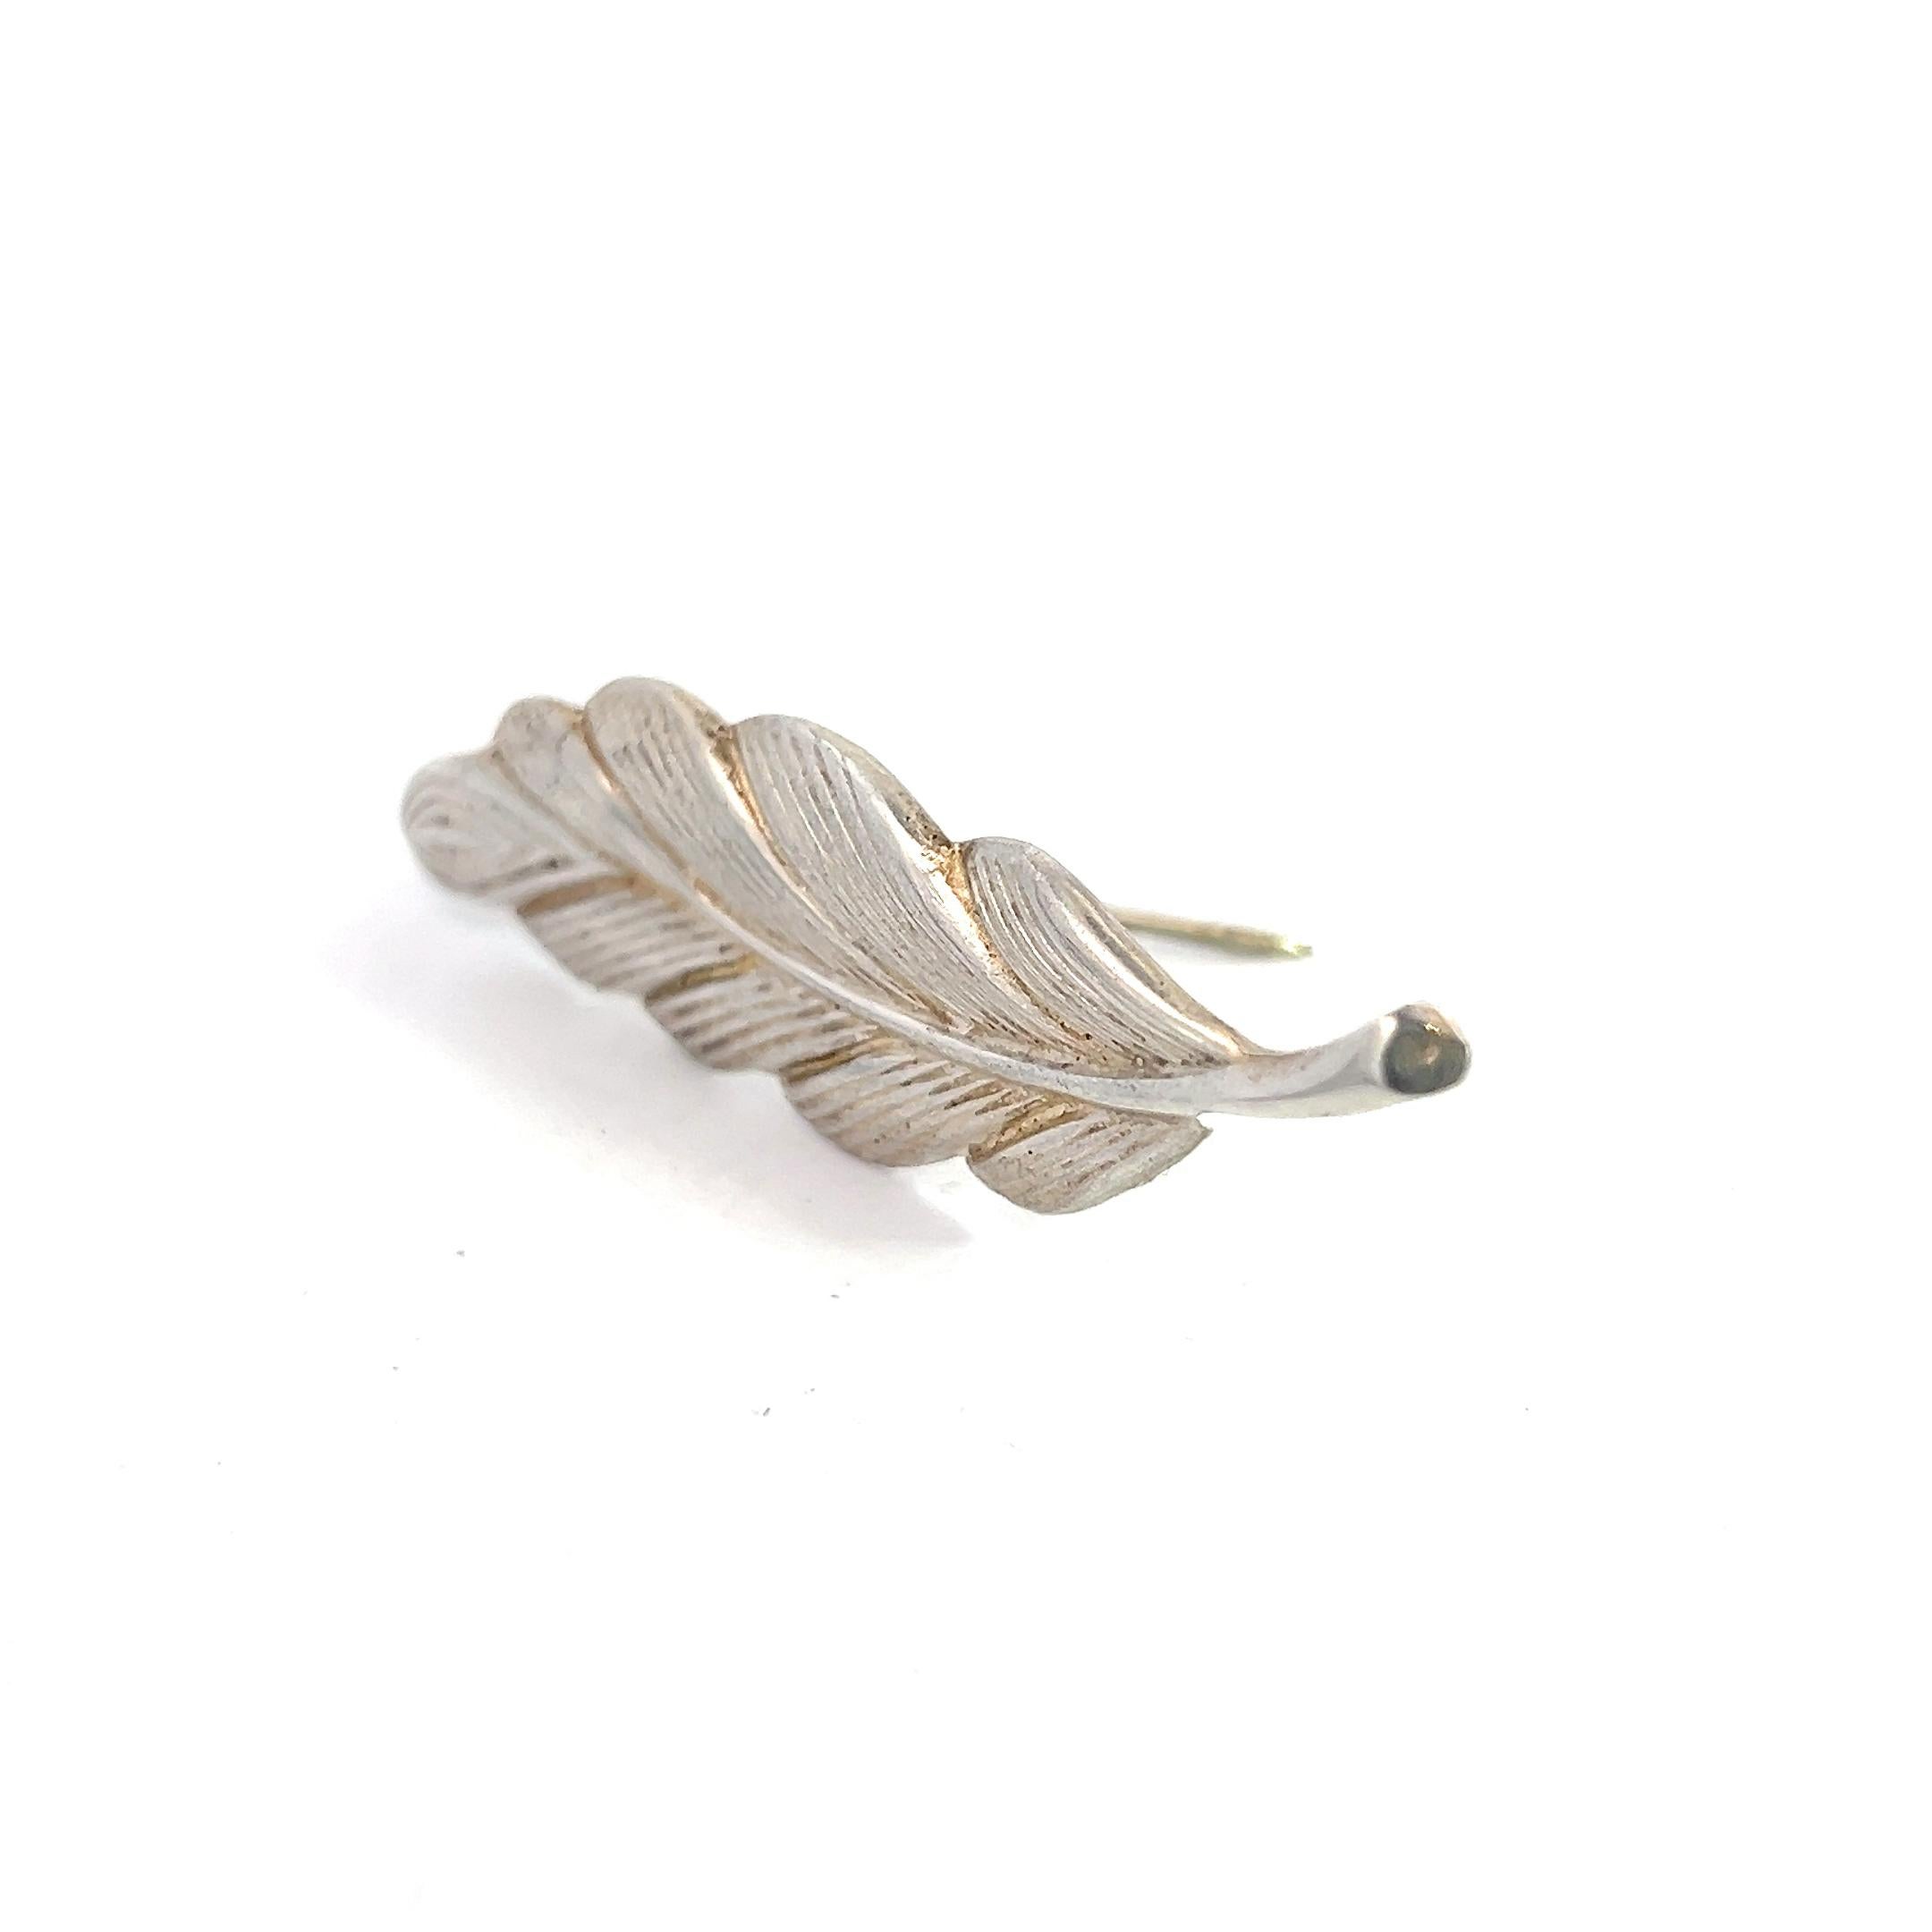 Tiffany & Co Estate Leaf Brooch Pin Sterling Silver TIF534

TRUSTED SELLER SINCE 2002

PLEASE SEE OUR HUNDREDS OF POSITIVE FEEDBACKS FROM OUR CLIENTS!!

FREE SHIPPING!!

DETAILS
Style: Leaf
Weight: 4.9 Grams
Metal: Sterling Silver

The Tiffany & Co